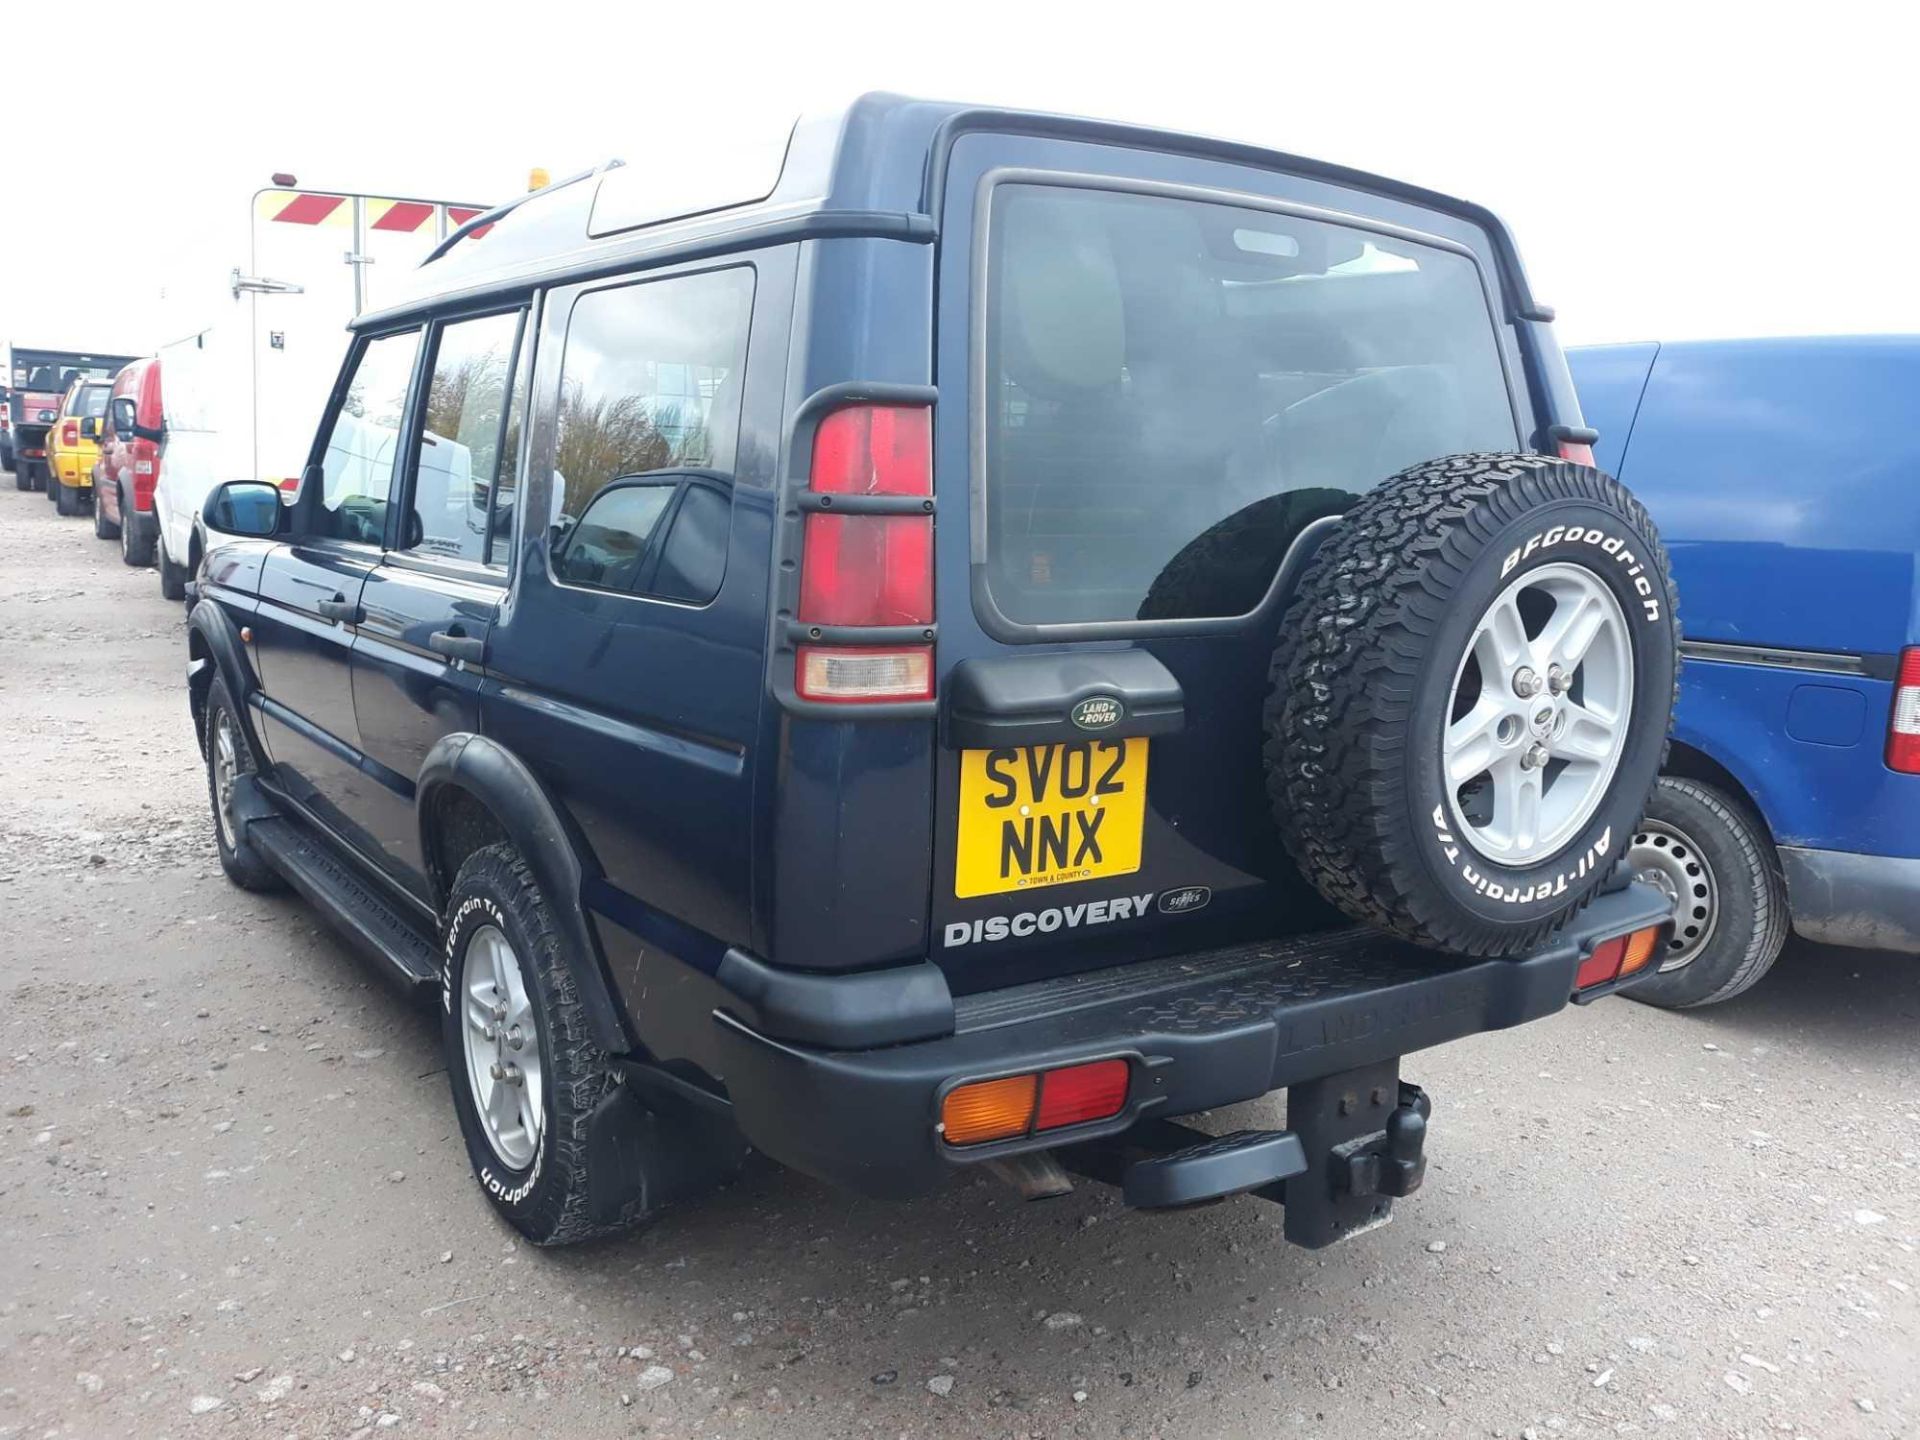 Land Rover Discovery Td5 Gs - 2495cc Estate - Image 3 of 3